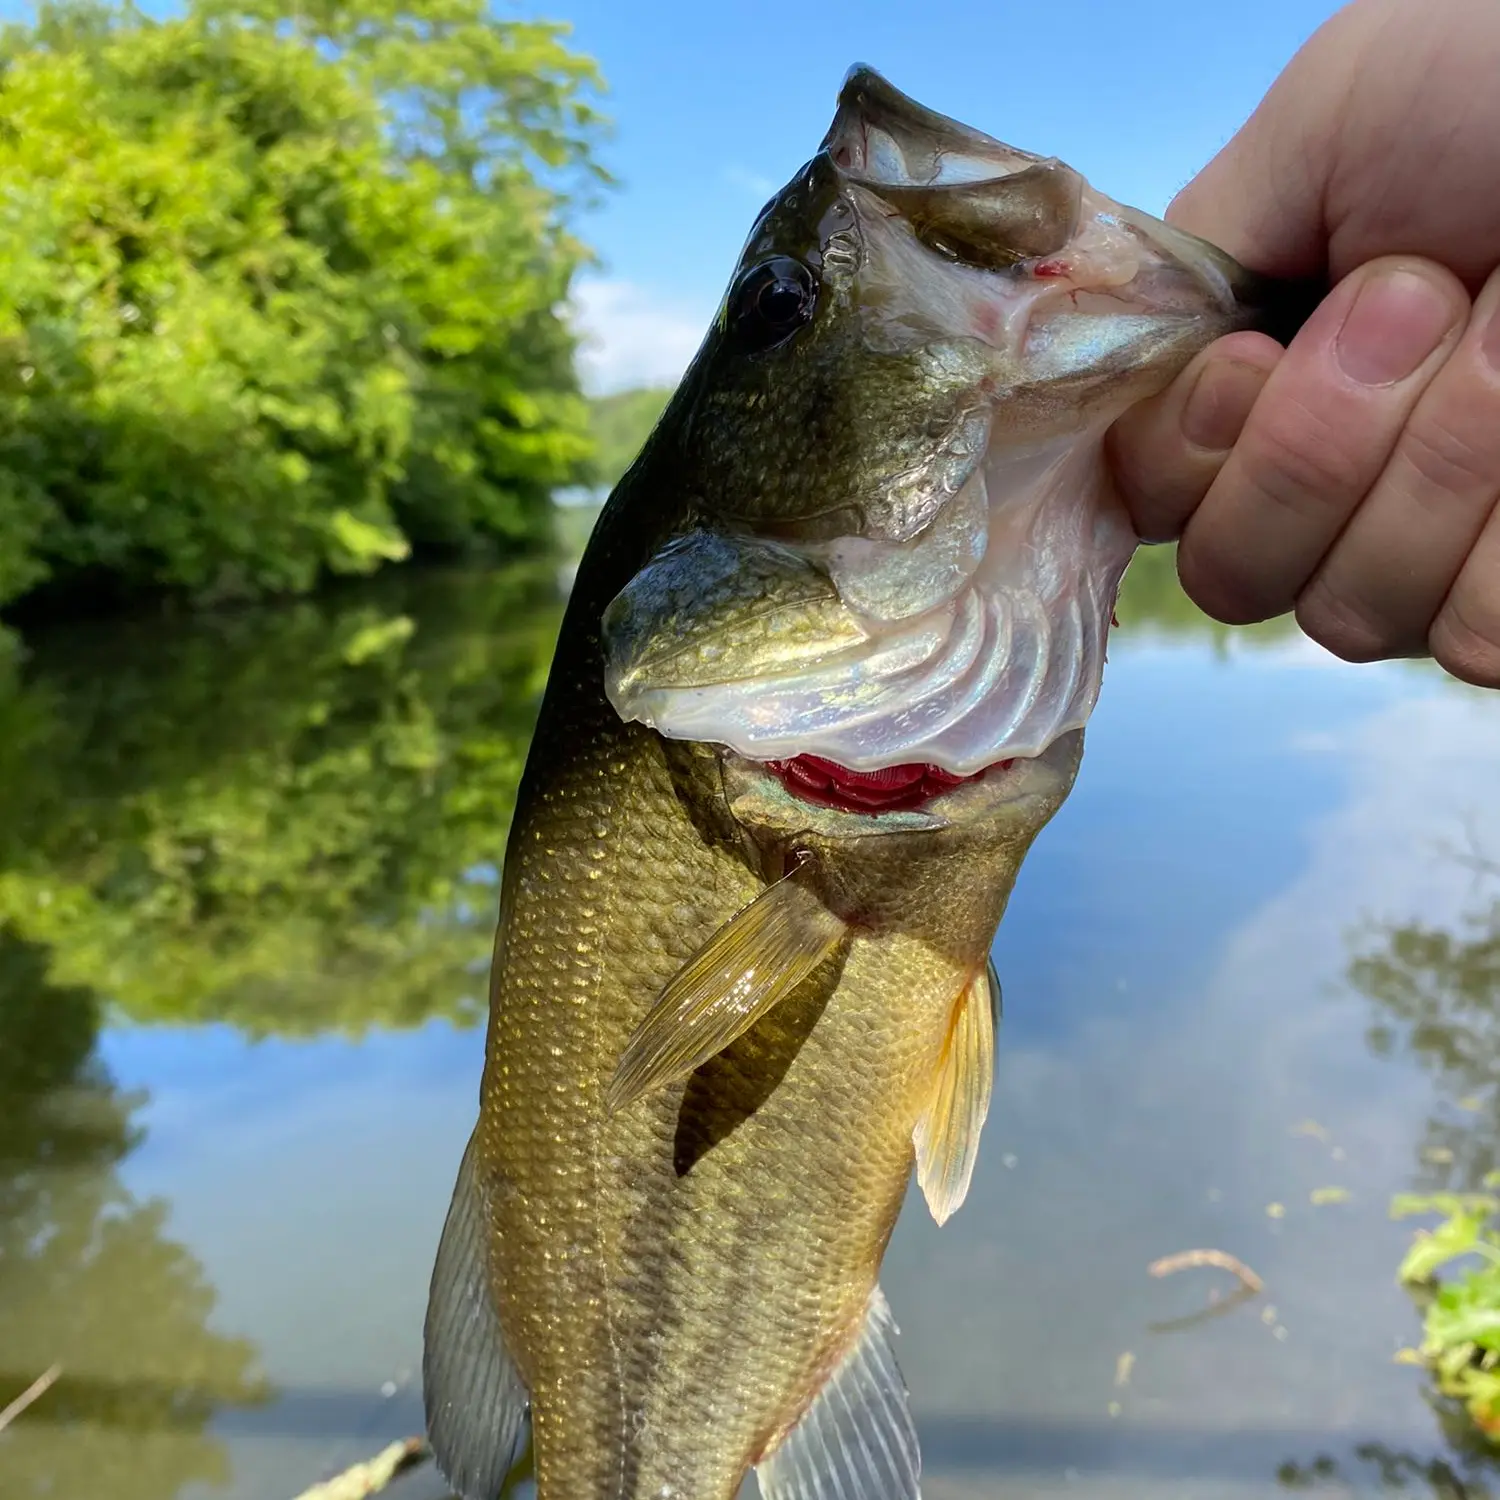 ᐅ Wedge Pond fishing reports🎣• Winchester, MA (United States) fishing